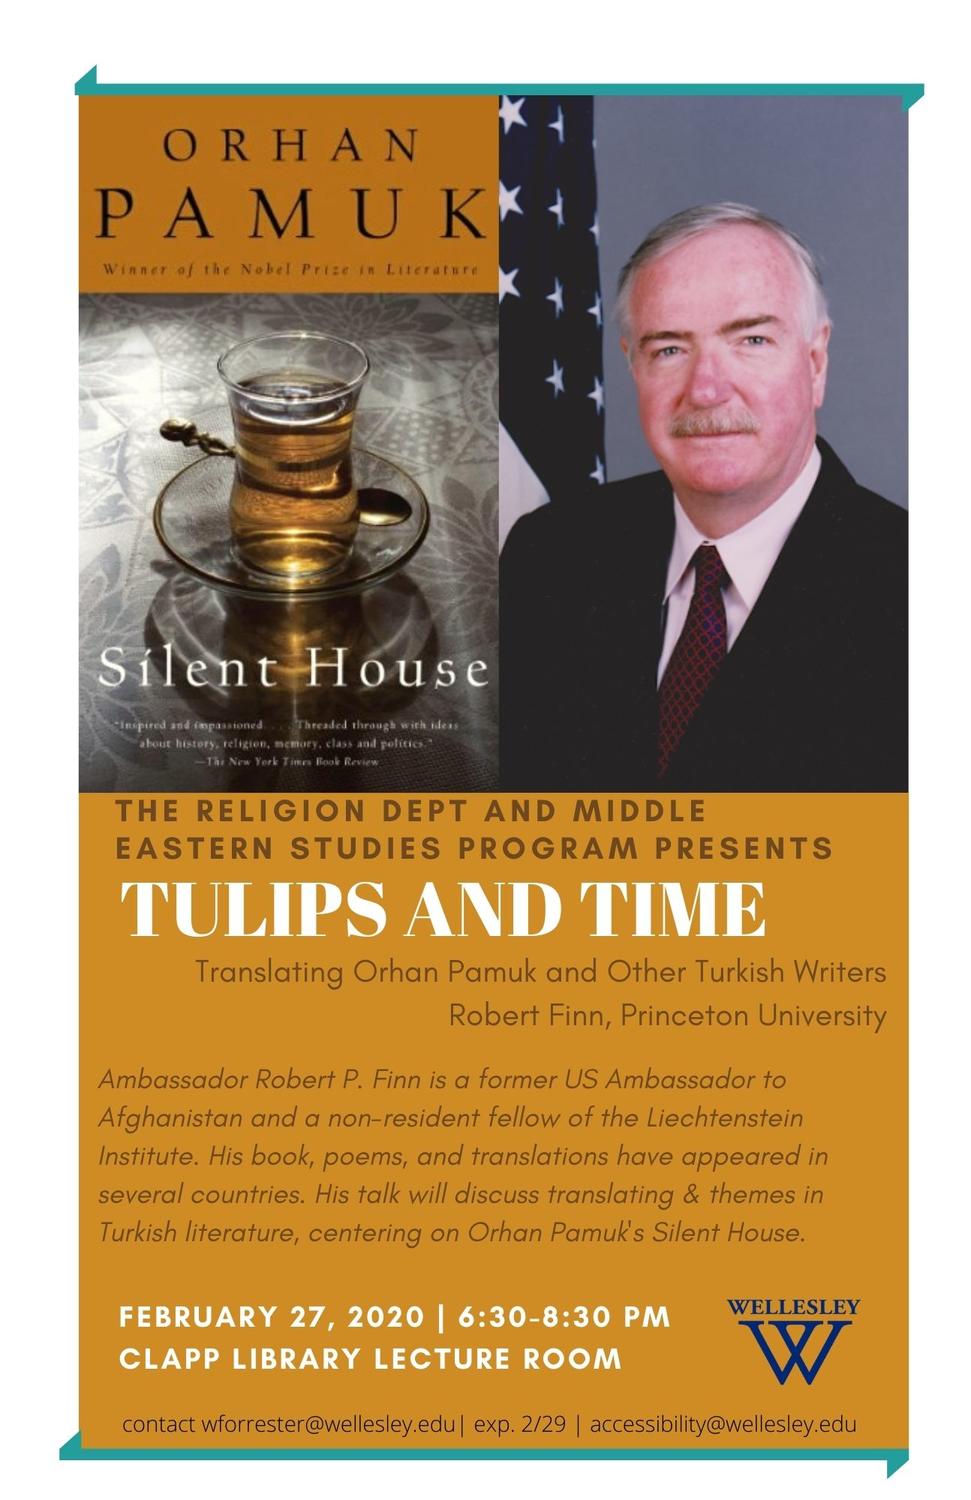 2020 Lecture by Robert Finn of Princeton University Called Tulips and Time, Translating Orhan Pamuk and Other Turkish Writers